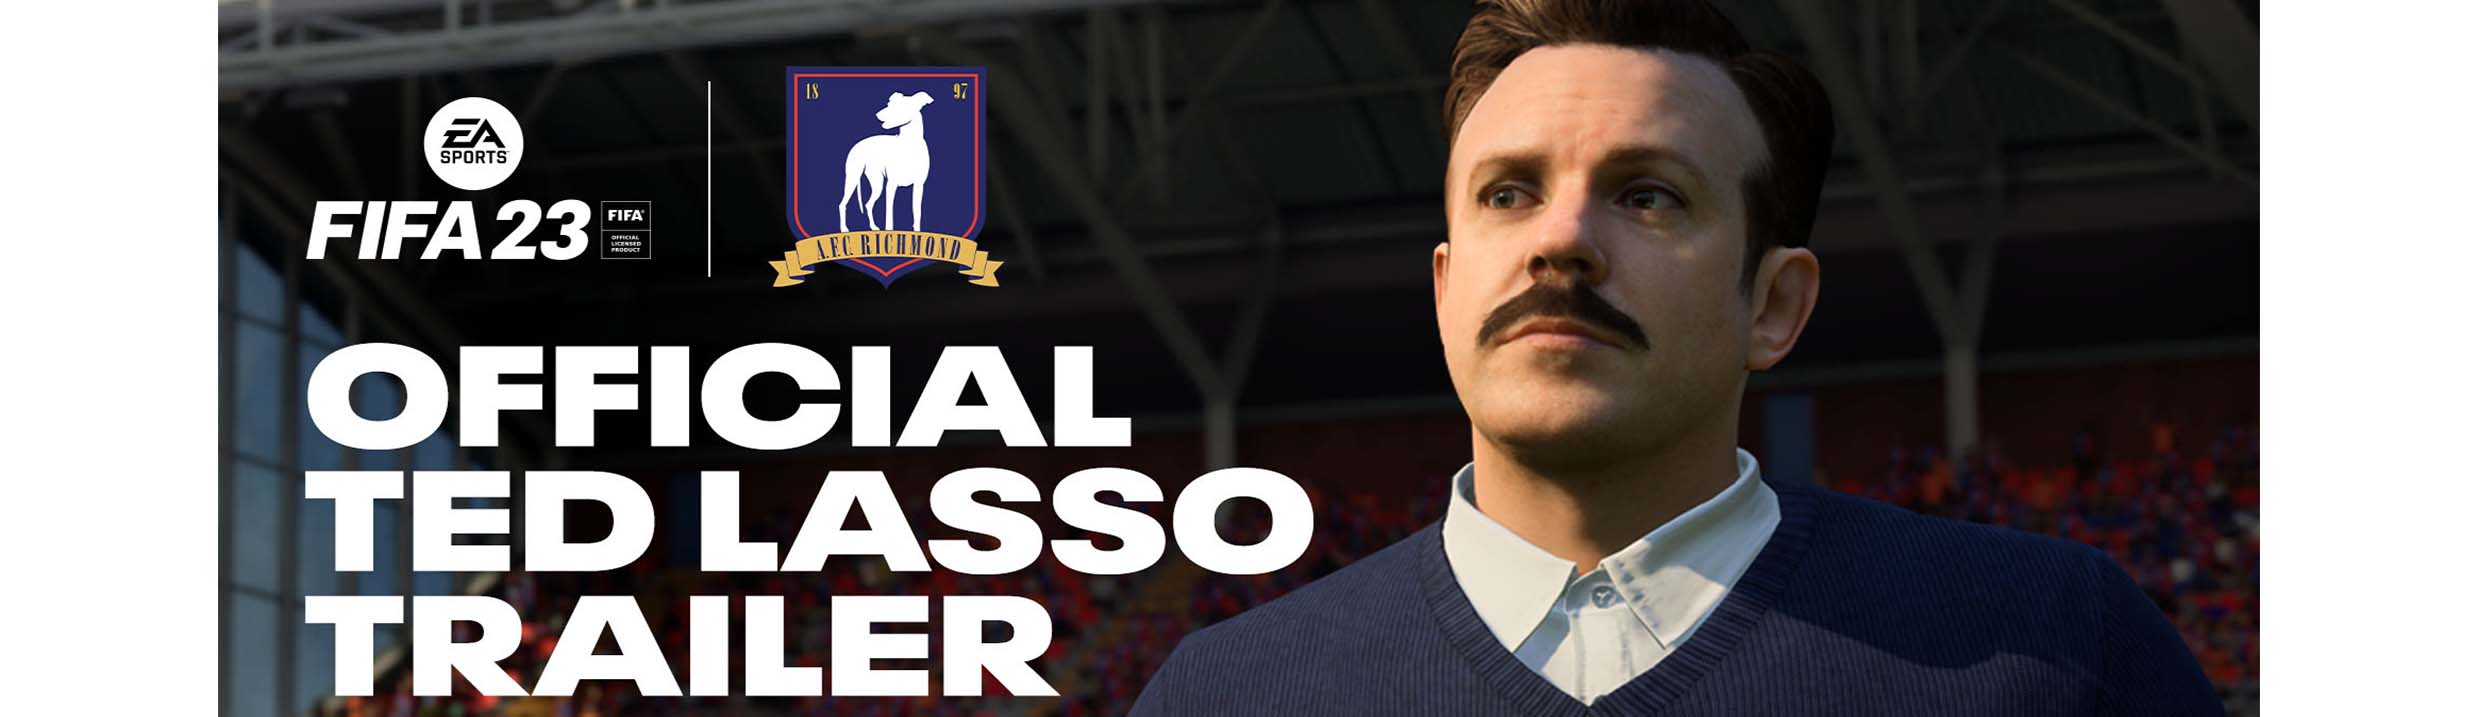 Ted lasso fifa 23 poster